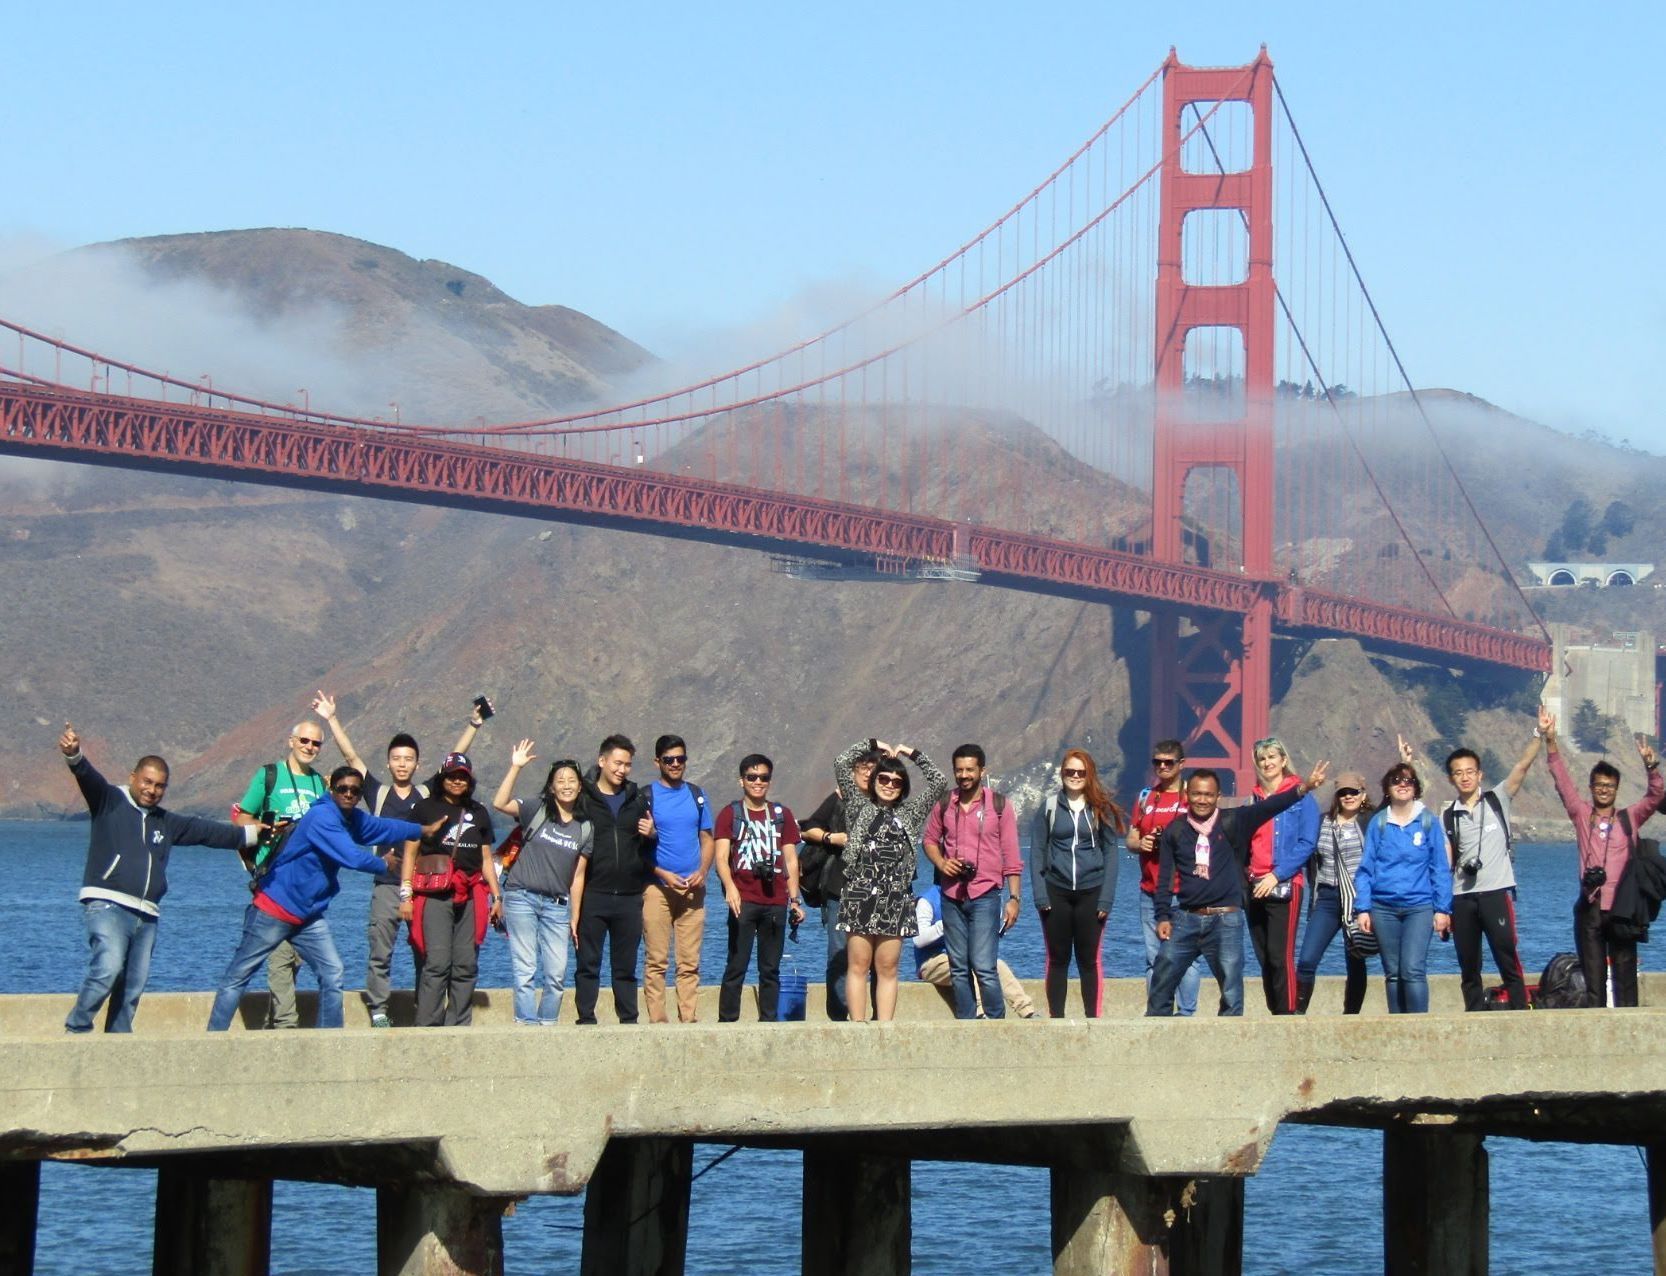 Local Guides Clean the World Connect Live 2018 Crew having fun in front of the Golden Gate Bridge Photo Credit: Myanmar Local Guide @Lattoria